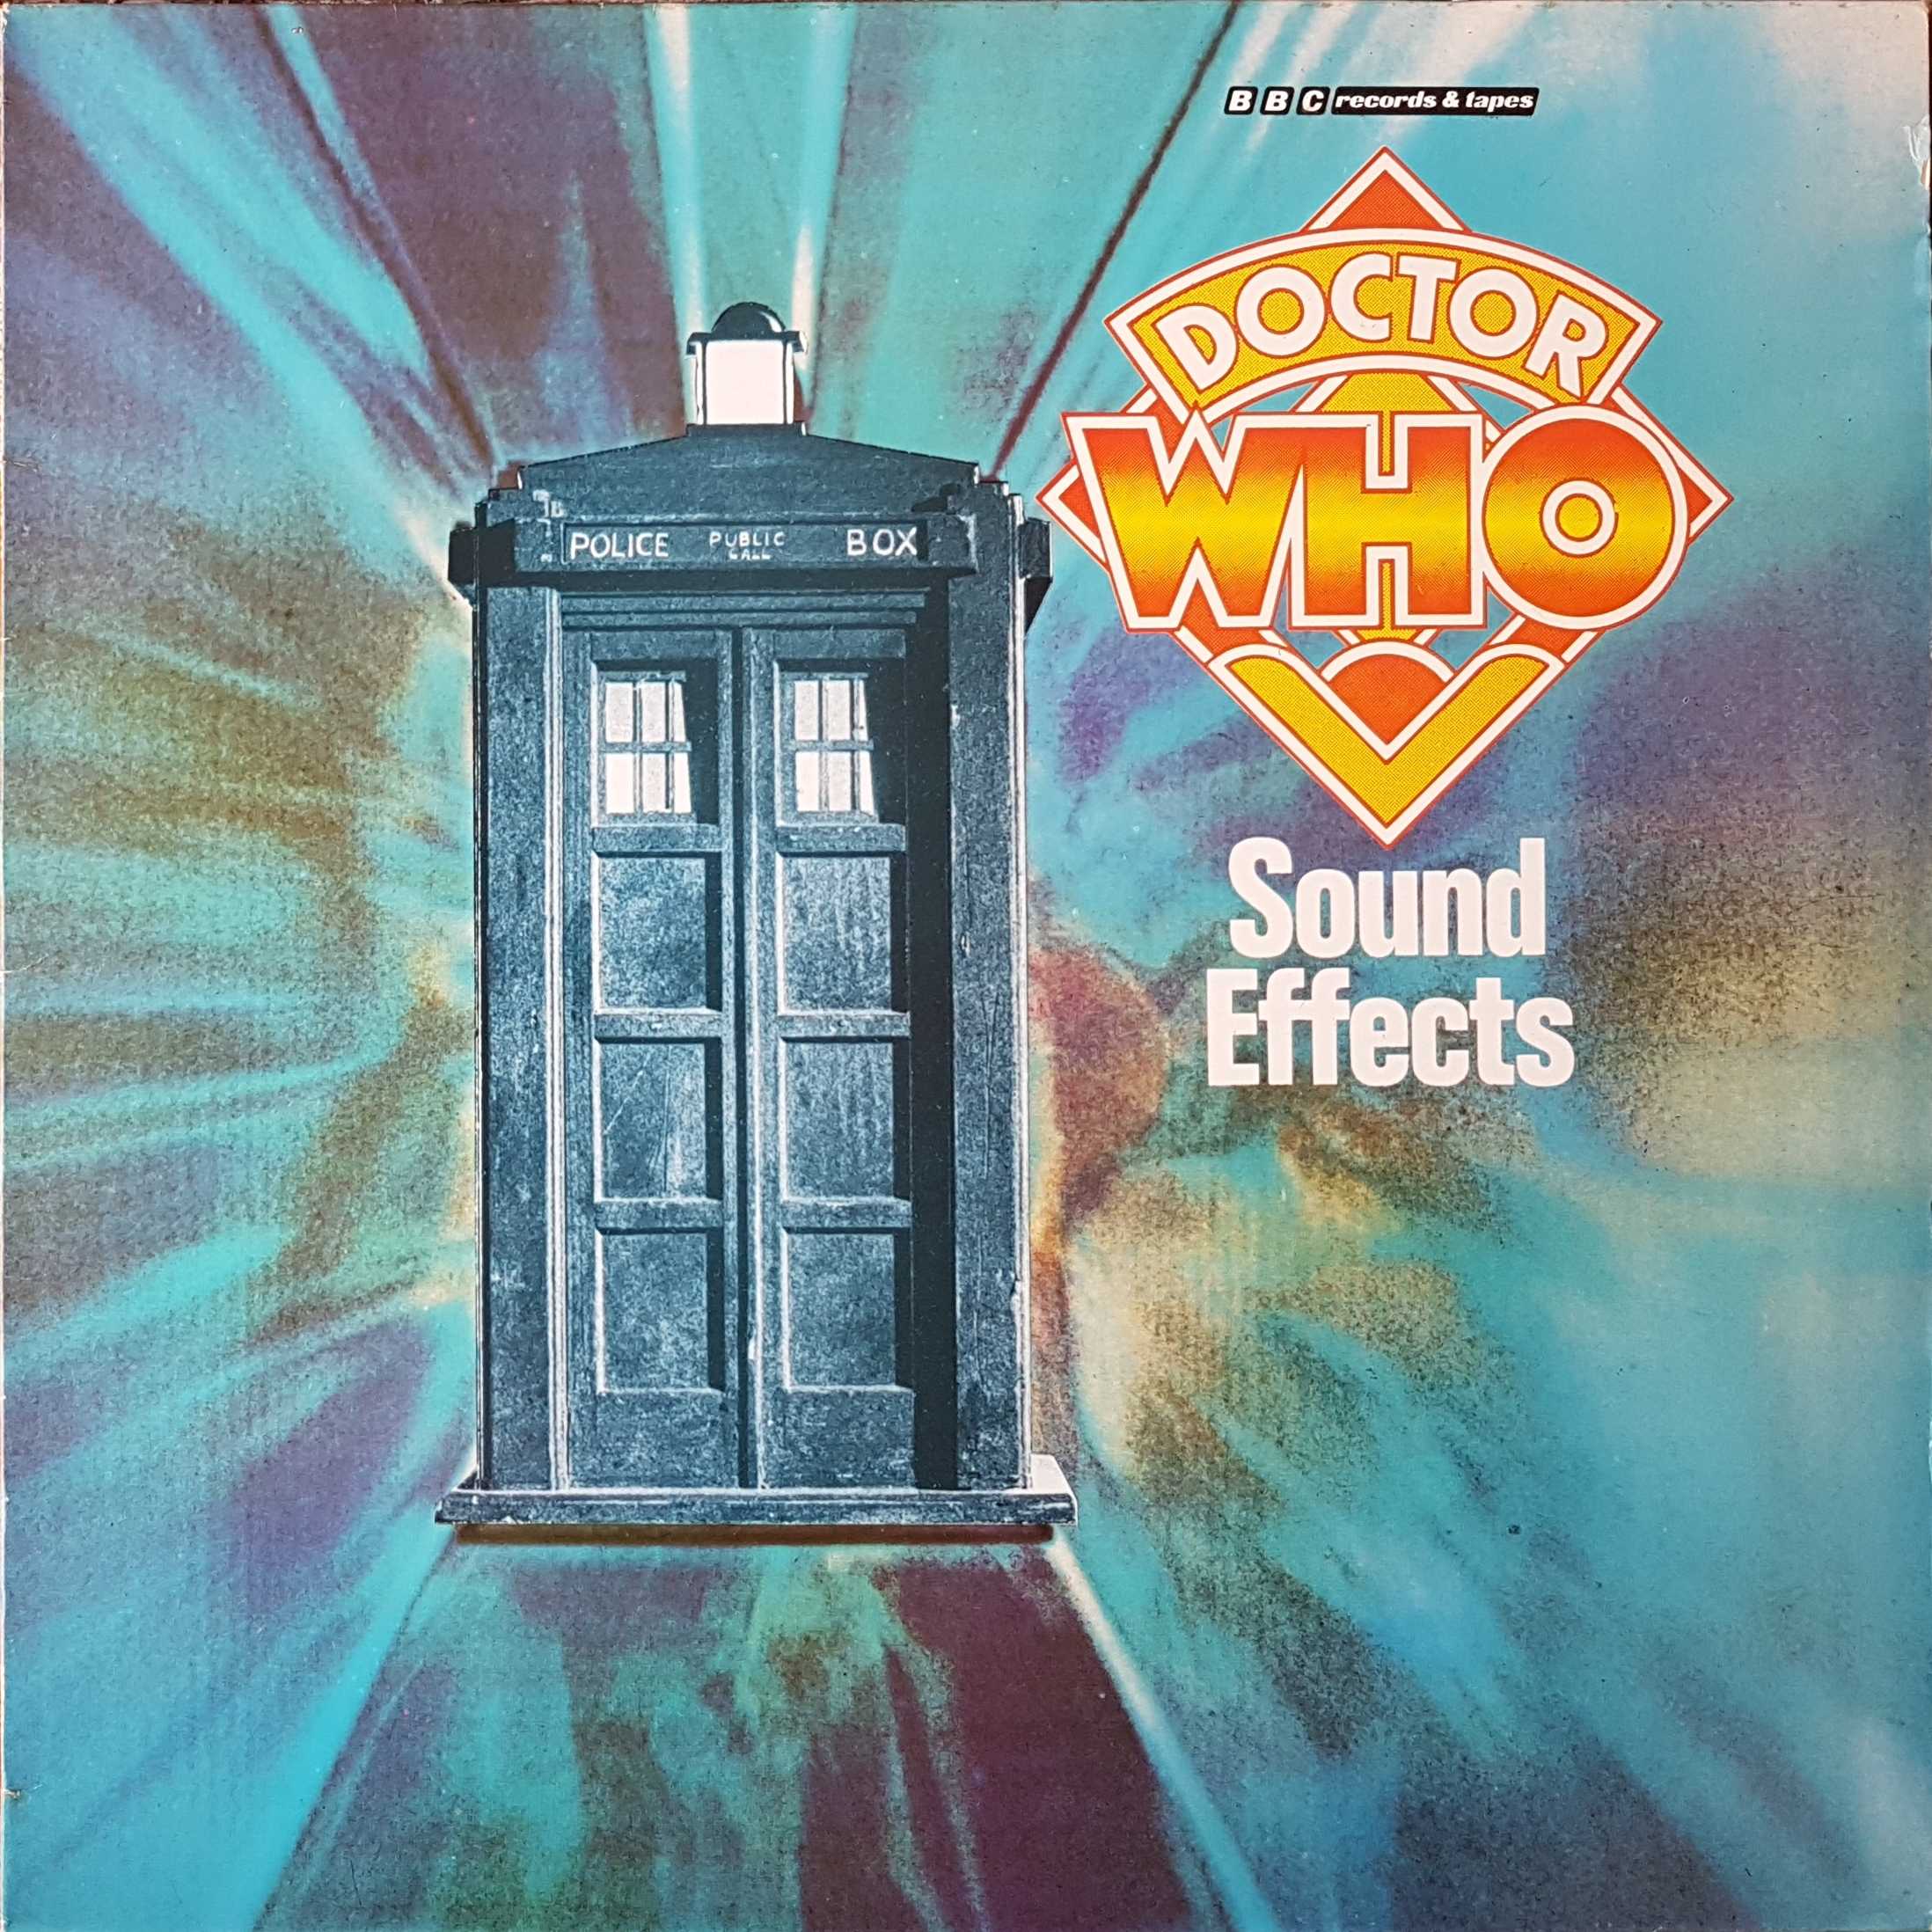 Picture of REC 316 Doctor Who sound effects by artist BBC radiophonic workshop from the BBC albums - Records and Tapes library